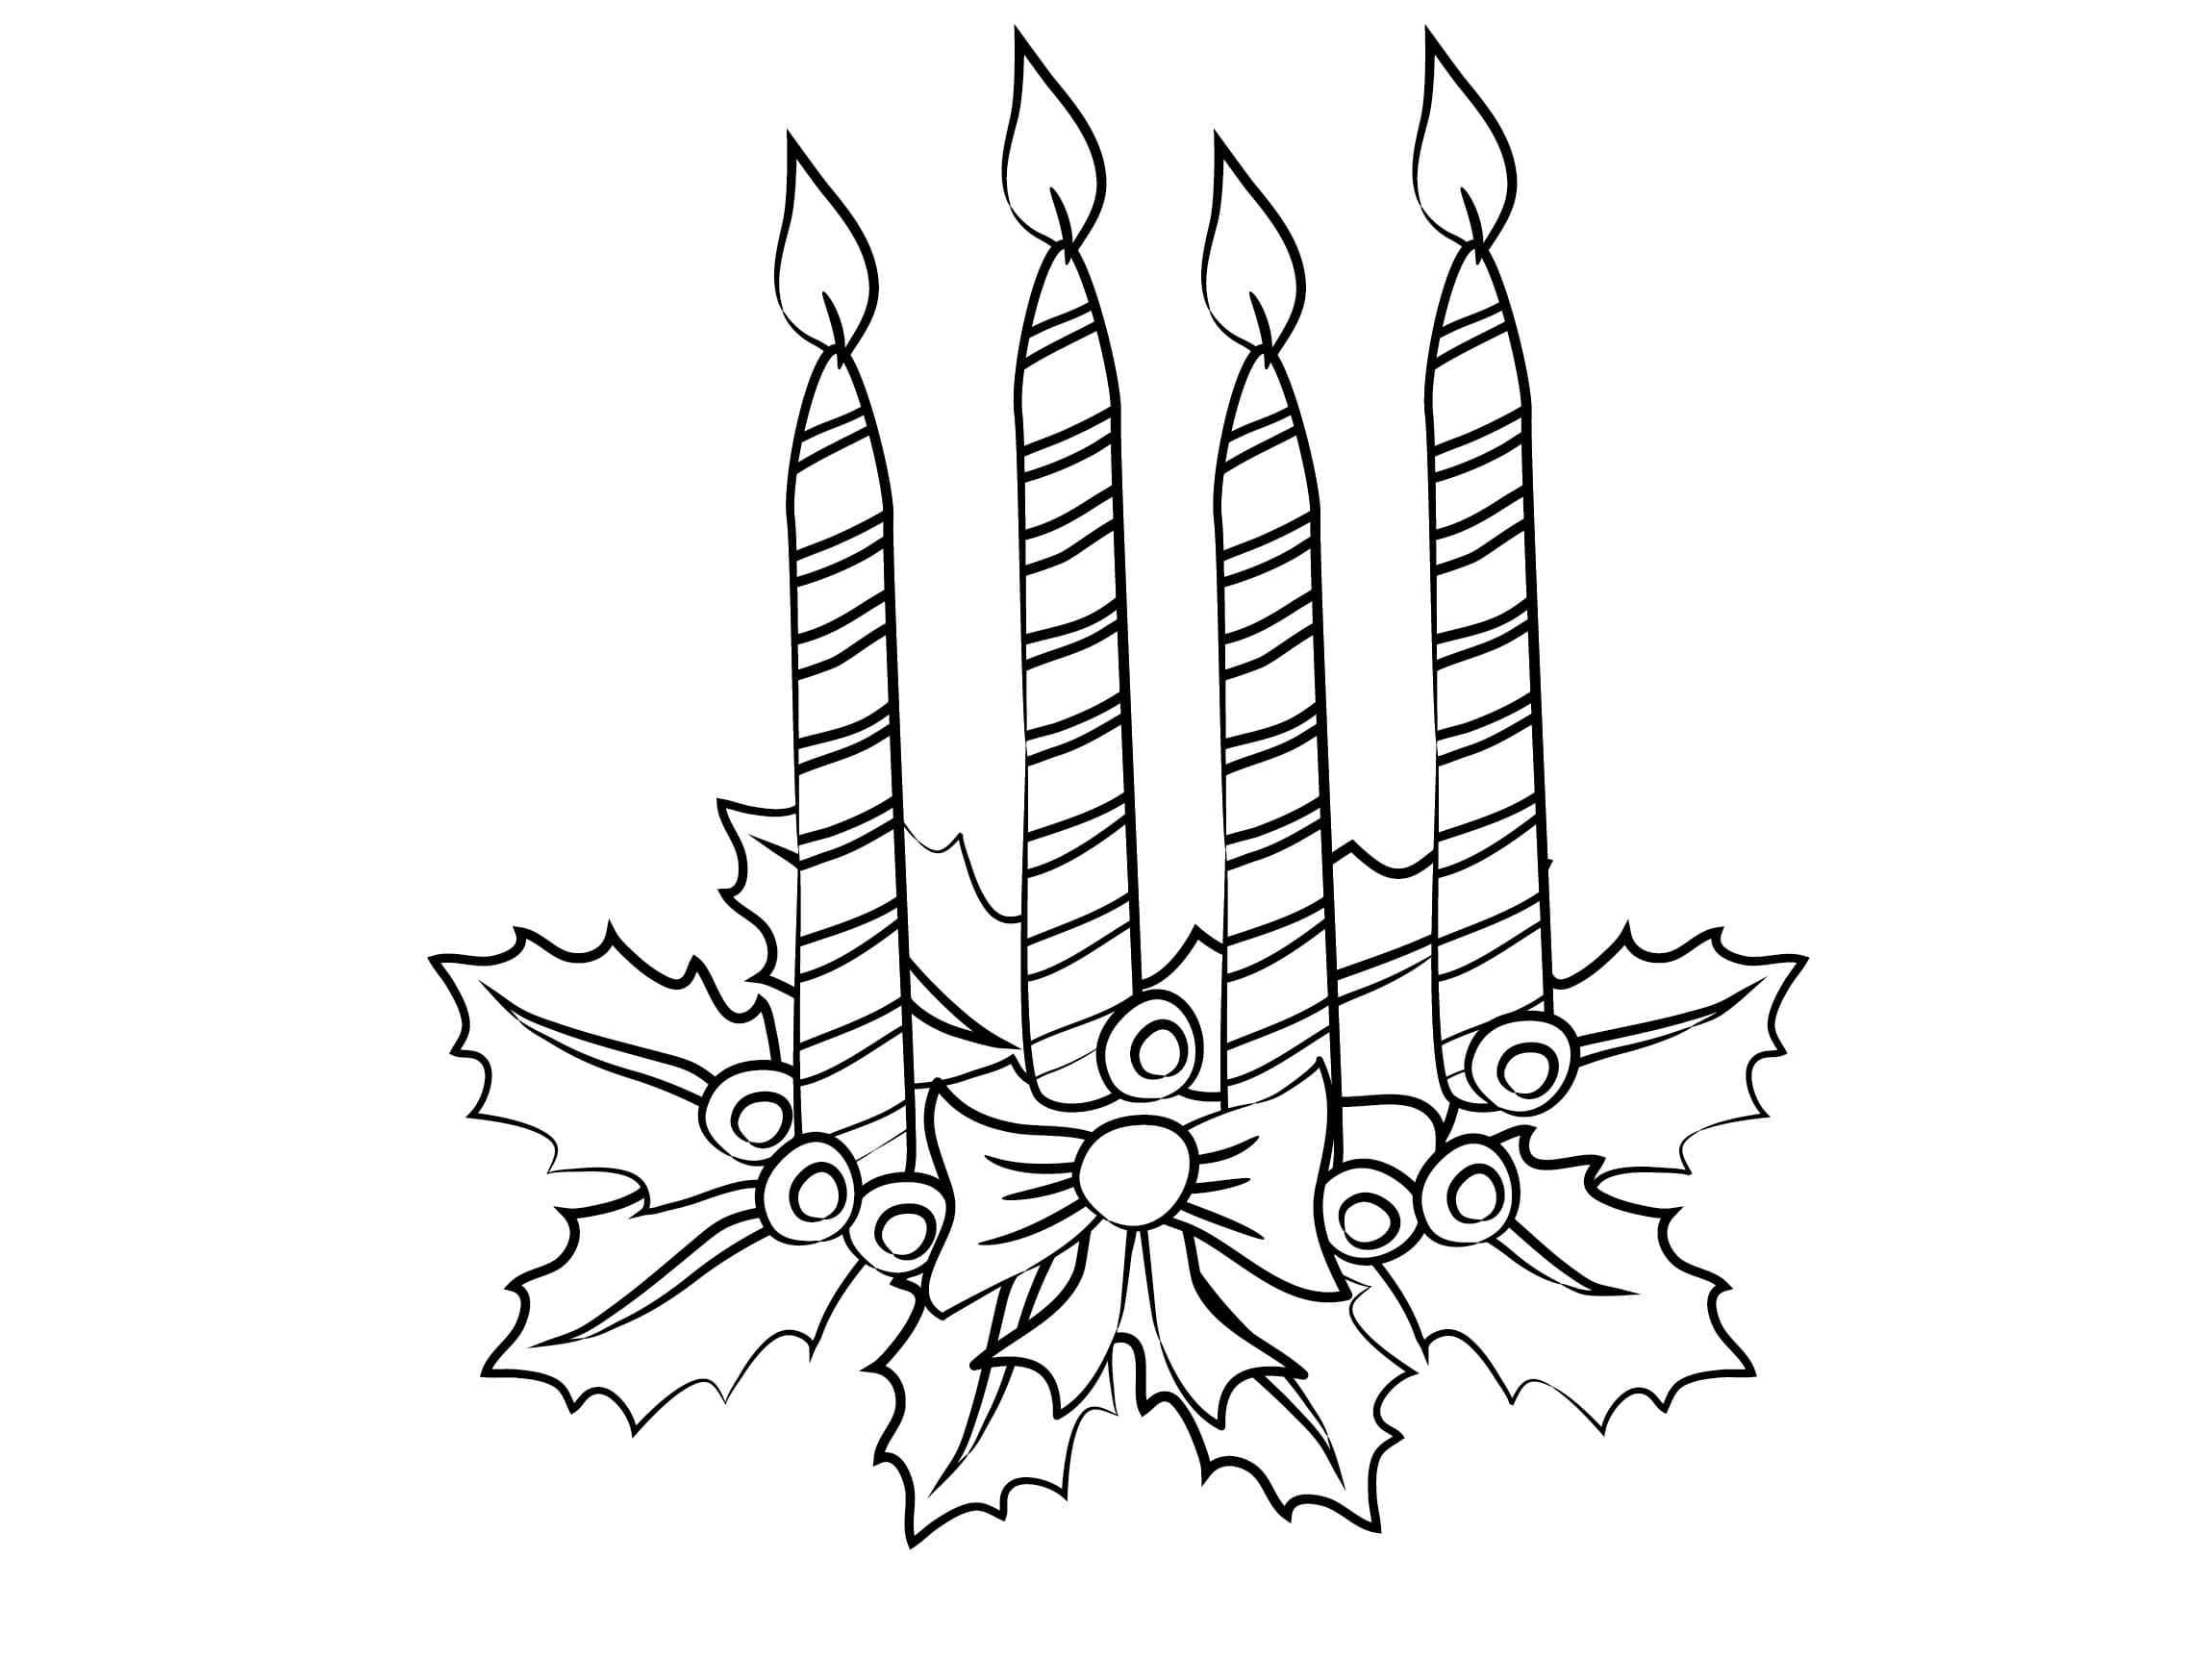 Four Magic Candles Coloring Page